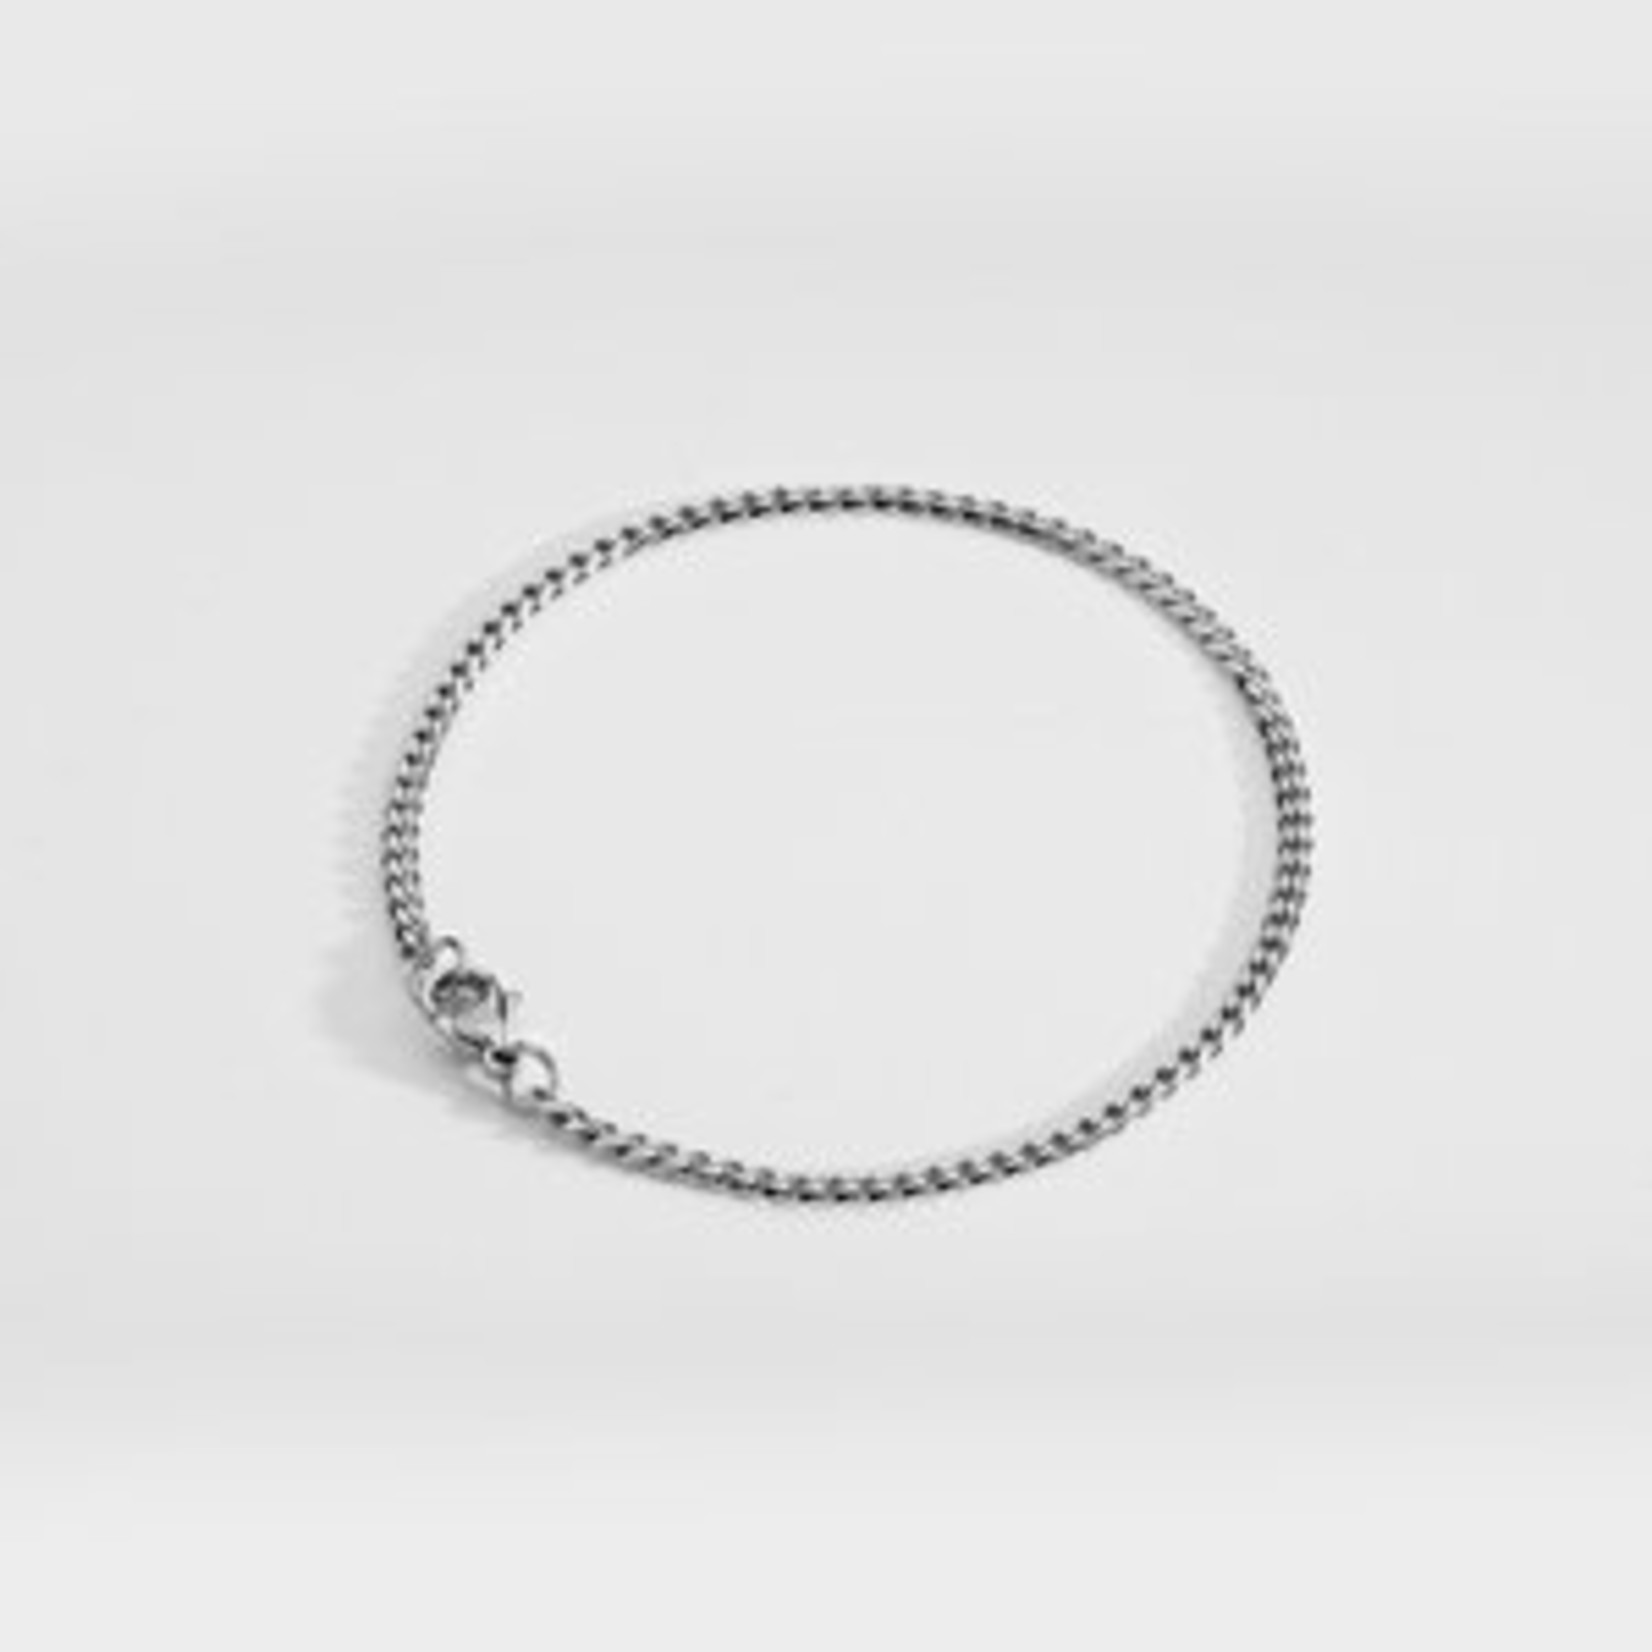 Northern Legacy Northern Legacy Nl Minimal Sequence Bracelet - Silver Tone